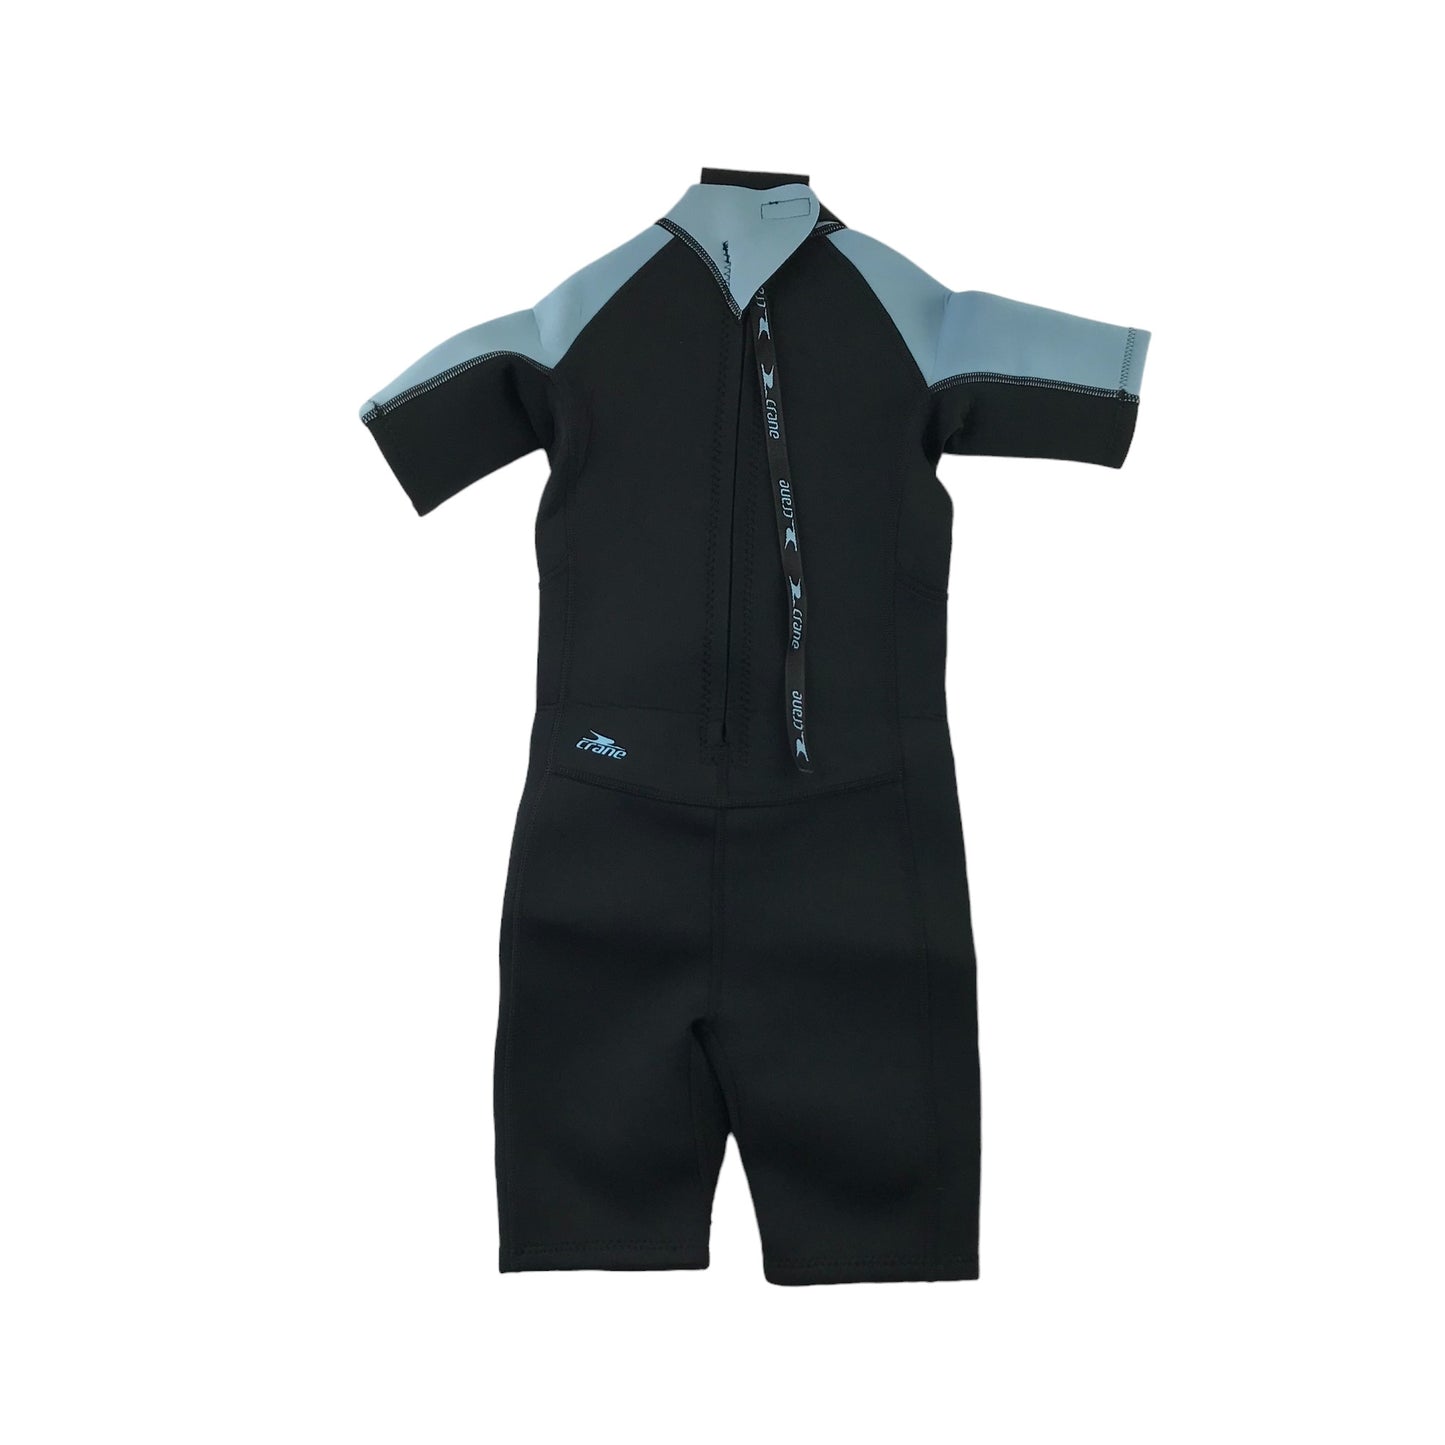 Crane wetsuit 7-8 years black and light blue short sleeve and leg